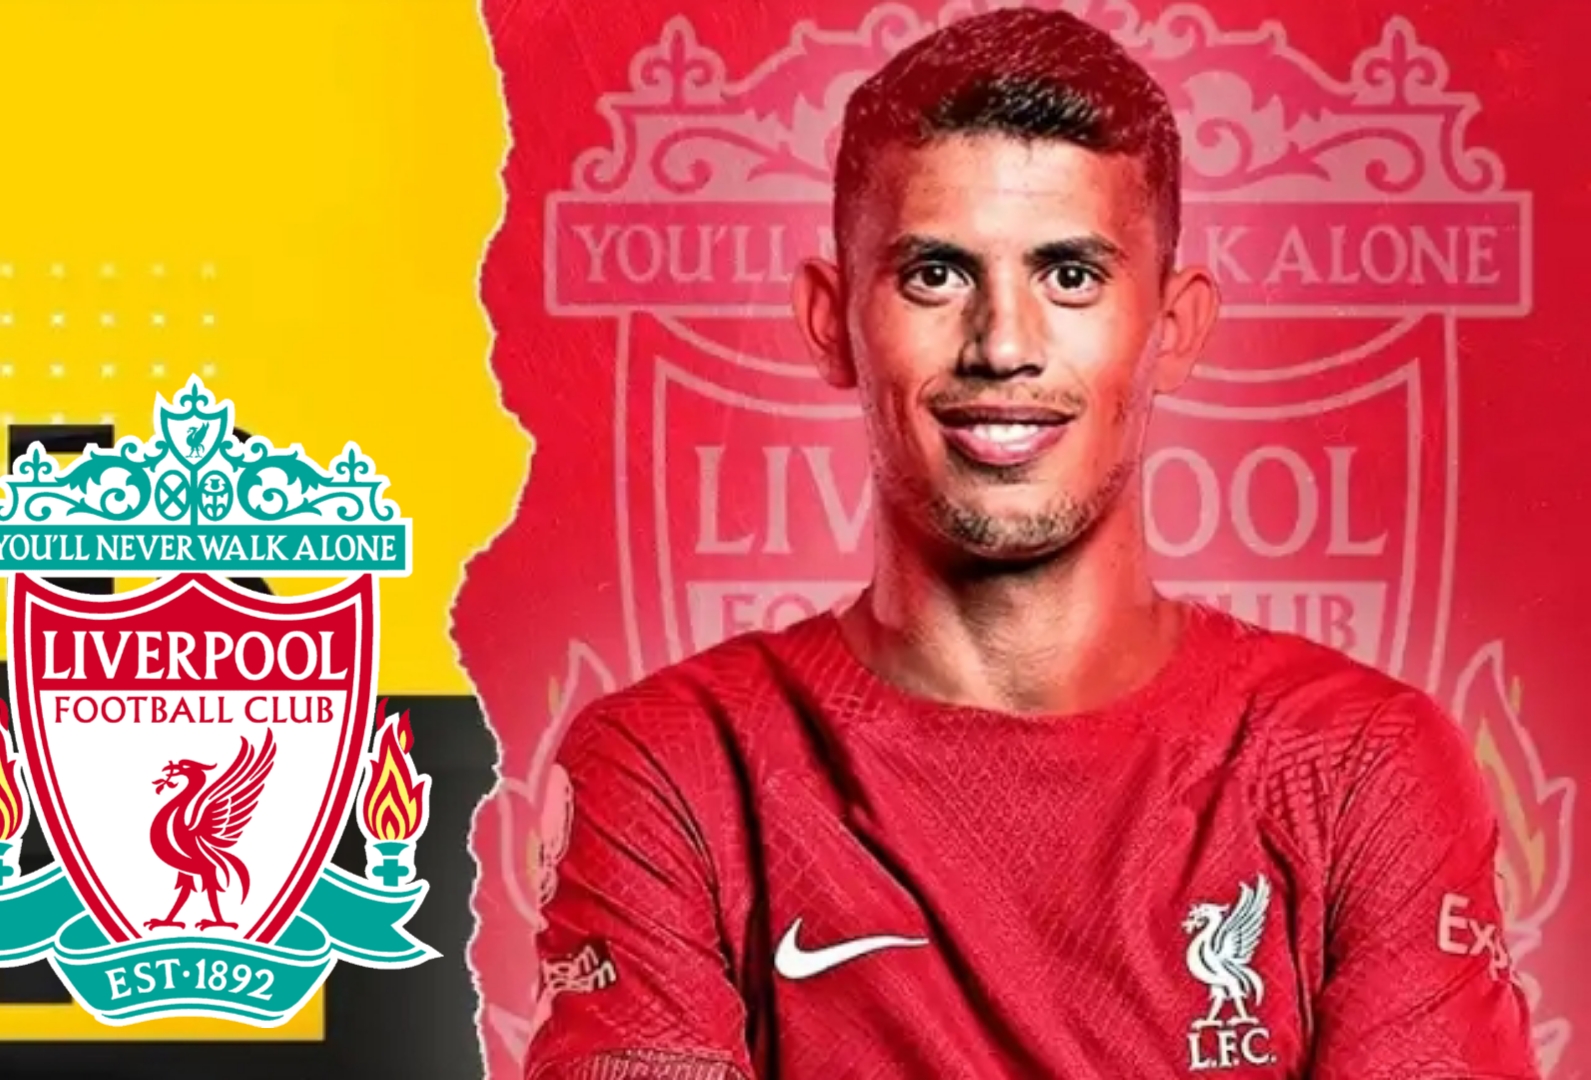 Journalists confirm Liverpool are ready to sign €50 million star midfielder in the January transfer window 1 Sportelo